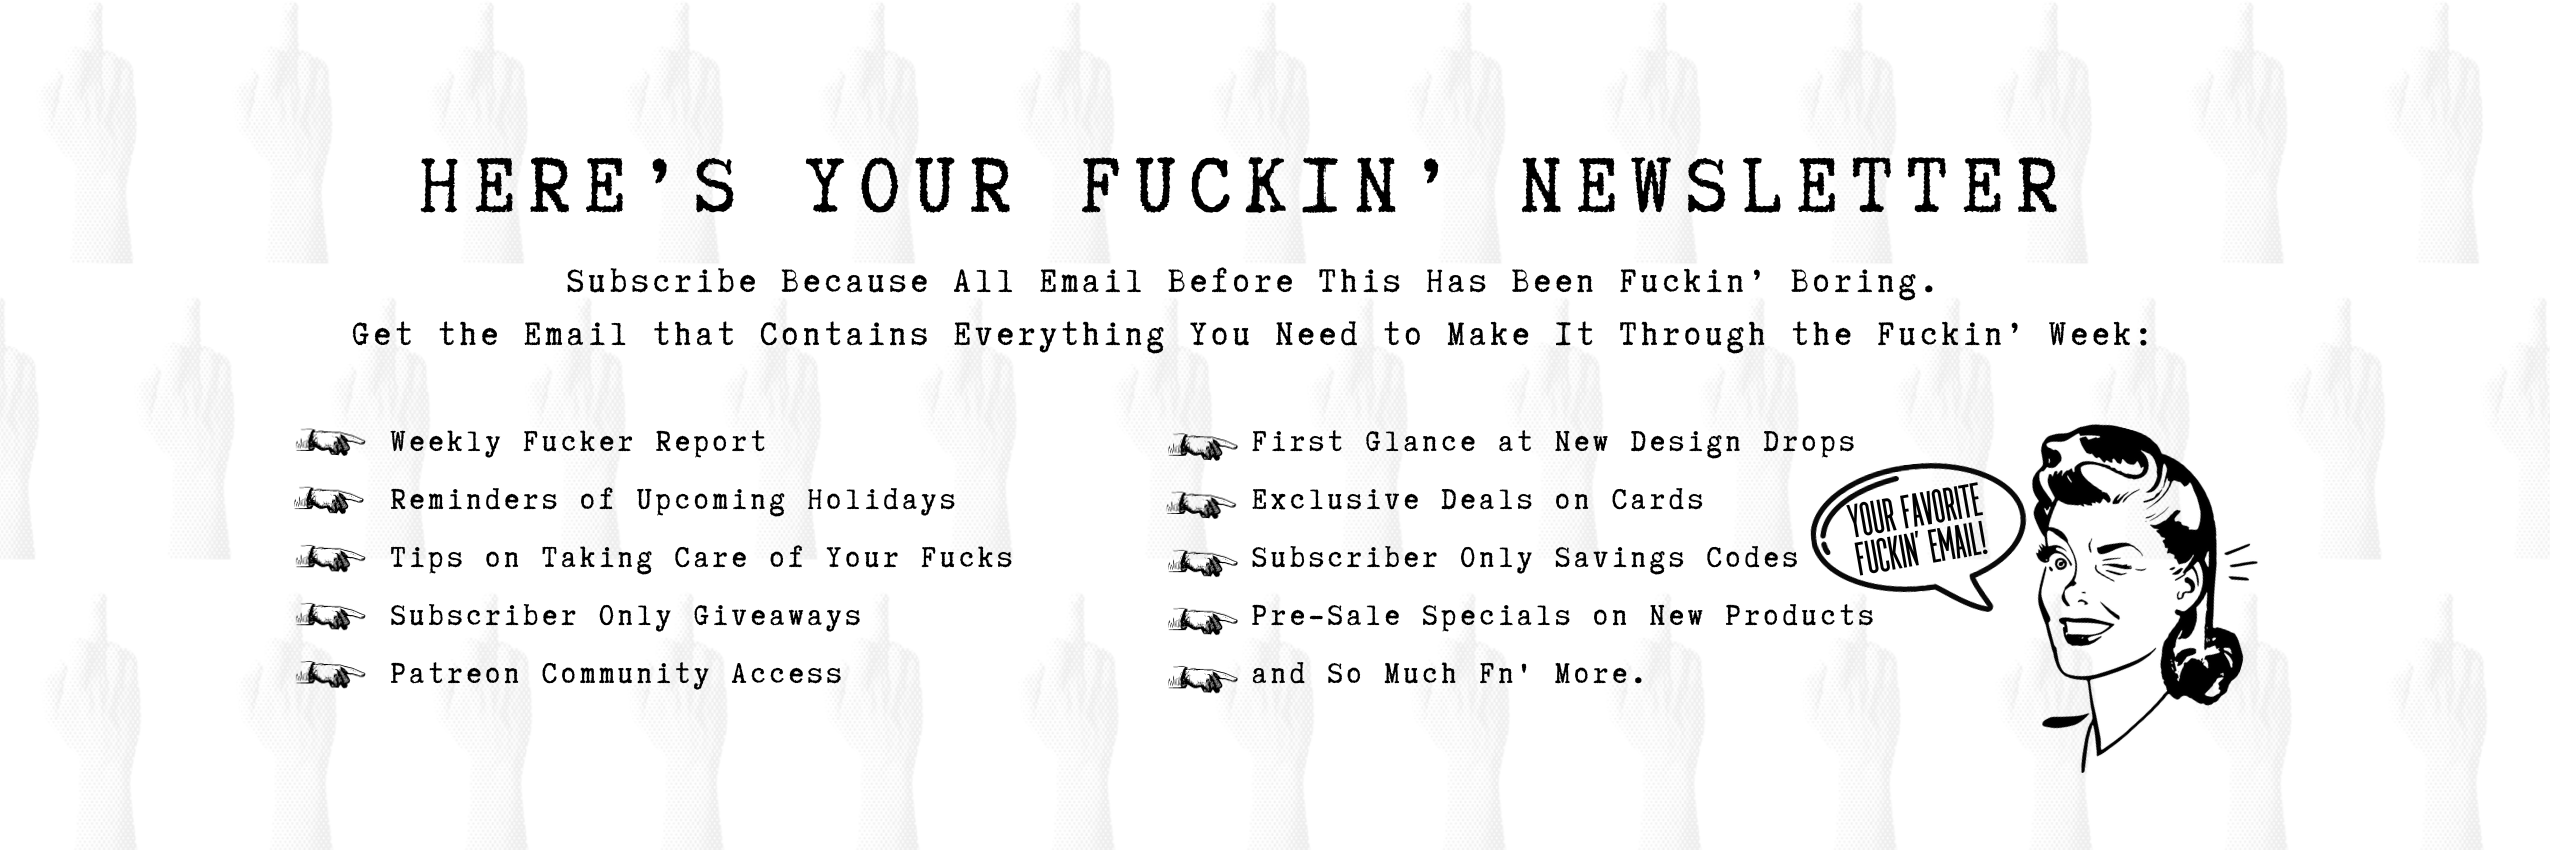 Sign up for the best fuckin newsletter to be delivered to your email including reminders of upcoming events, exclusive savings, funny fucking stories and more